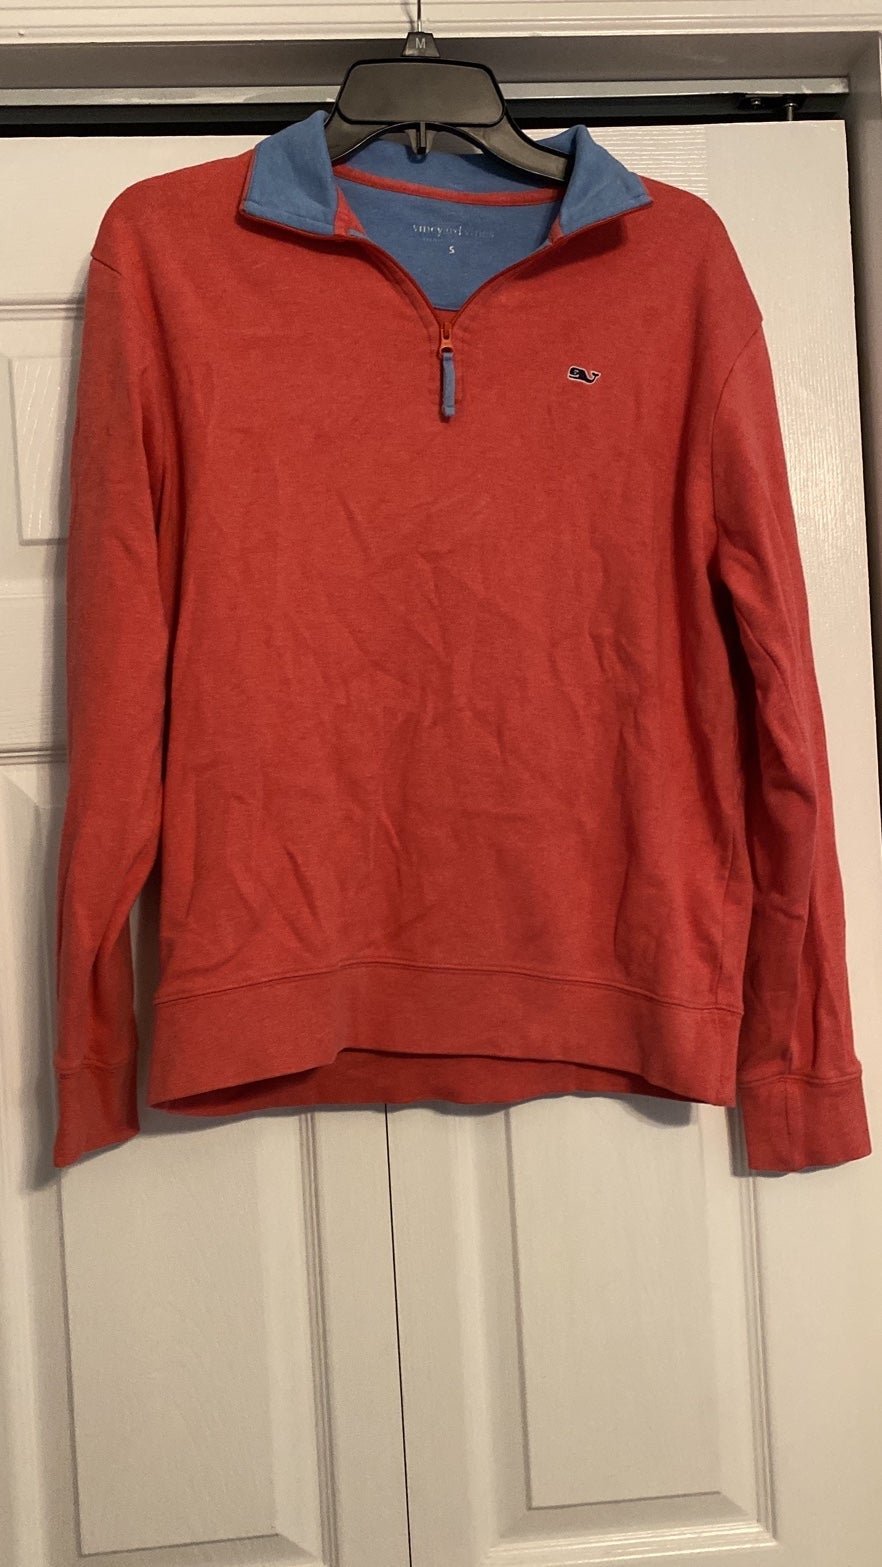 reasonable price Vineyard Vines Womens Pullover SMALL hAc1B4CVm US Outlet